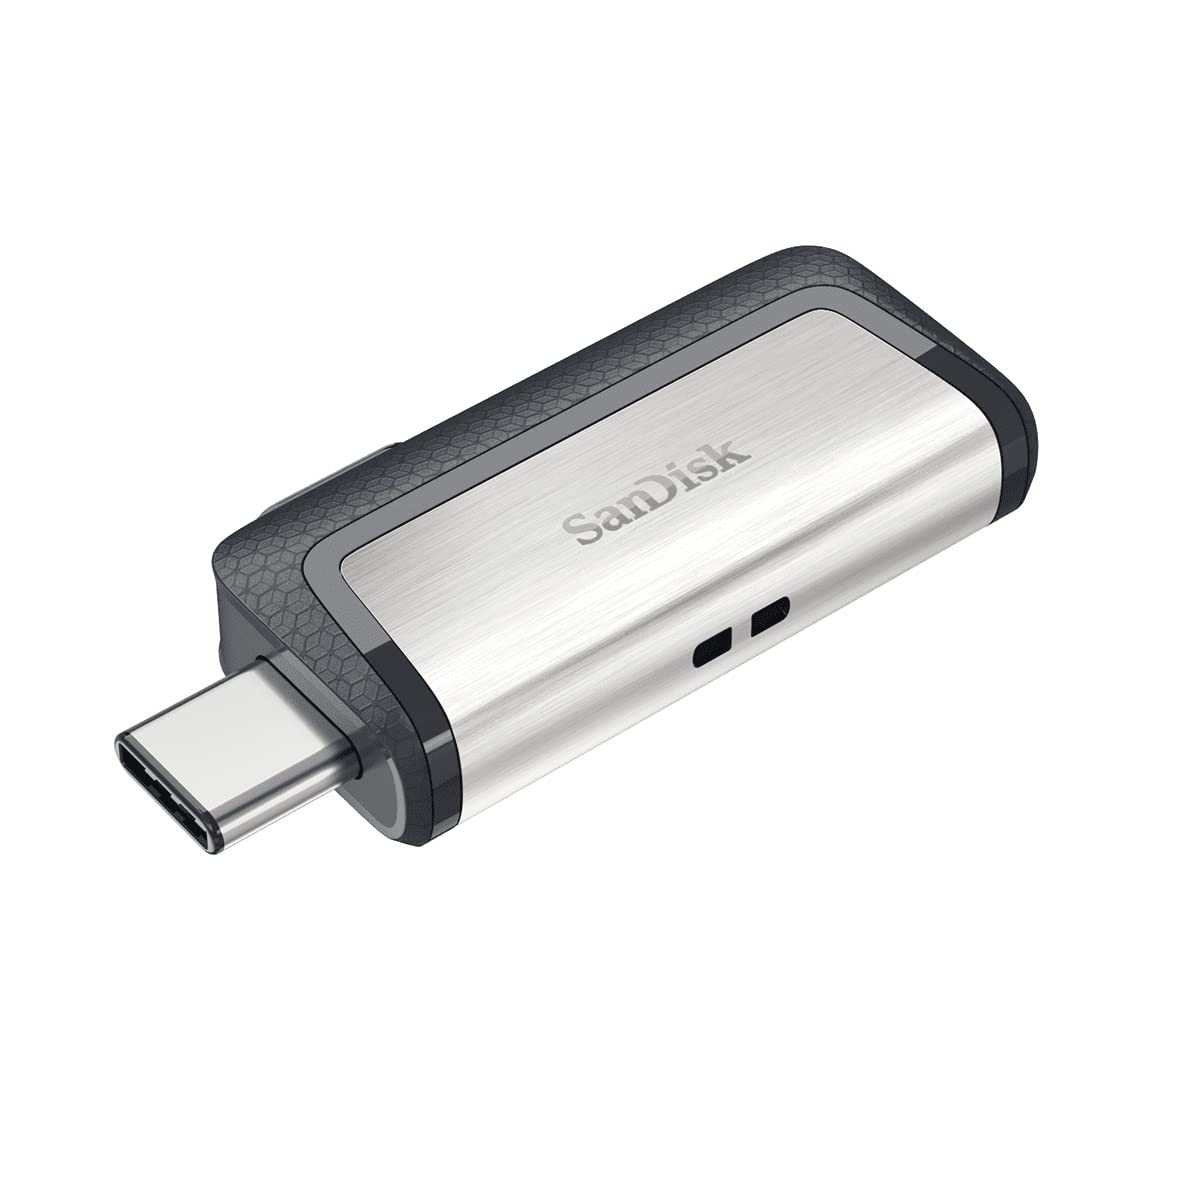 SanDisk 256GB Ultra Dual Connector USB 3.1 Type-C & Type-A Black $11 shipped Amazon Prime